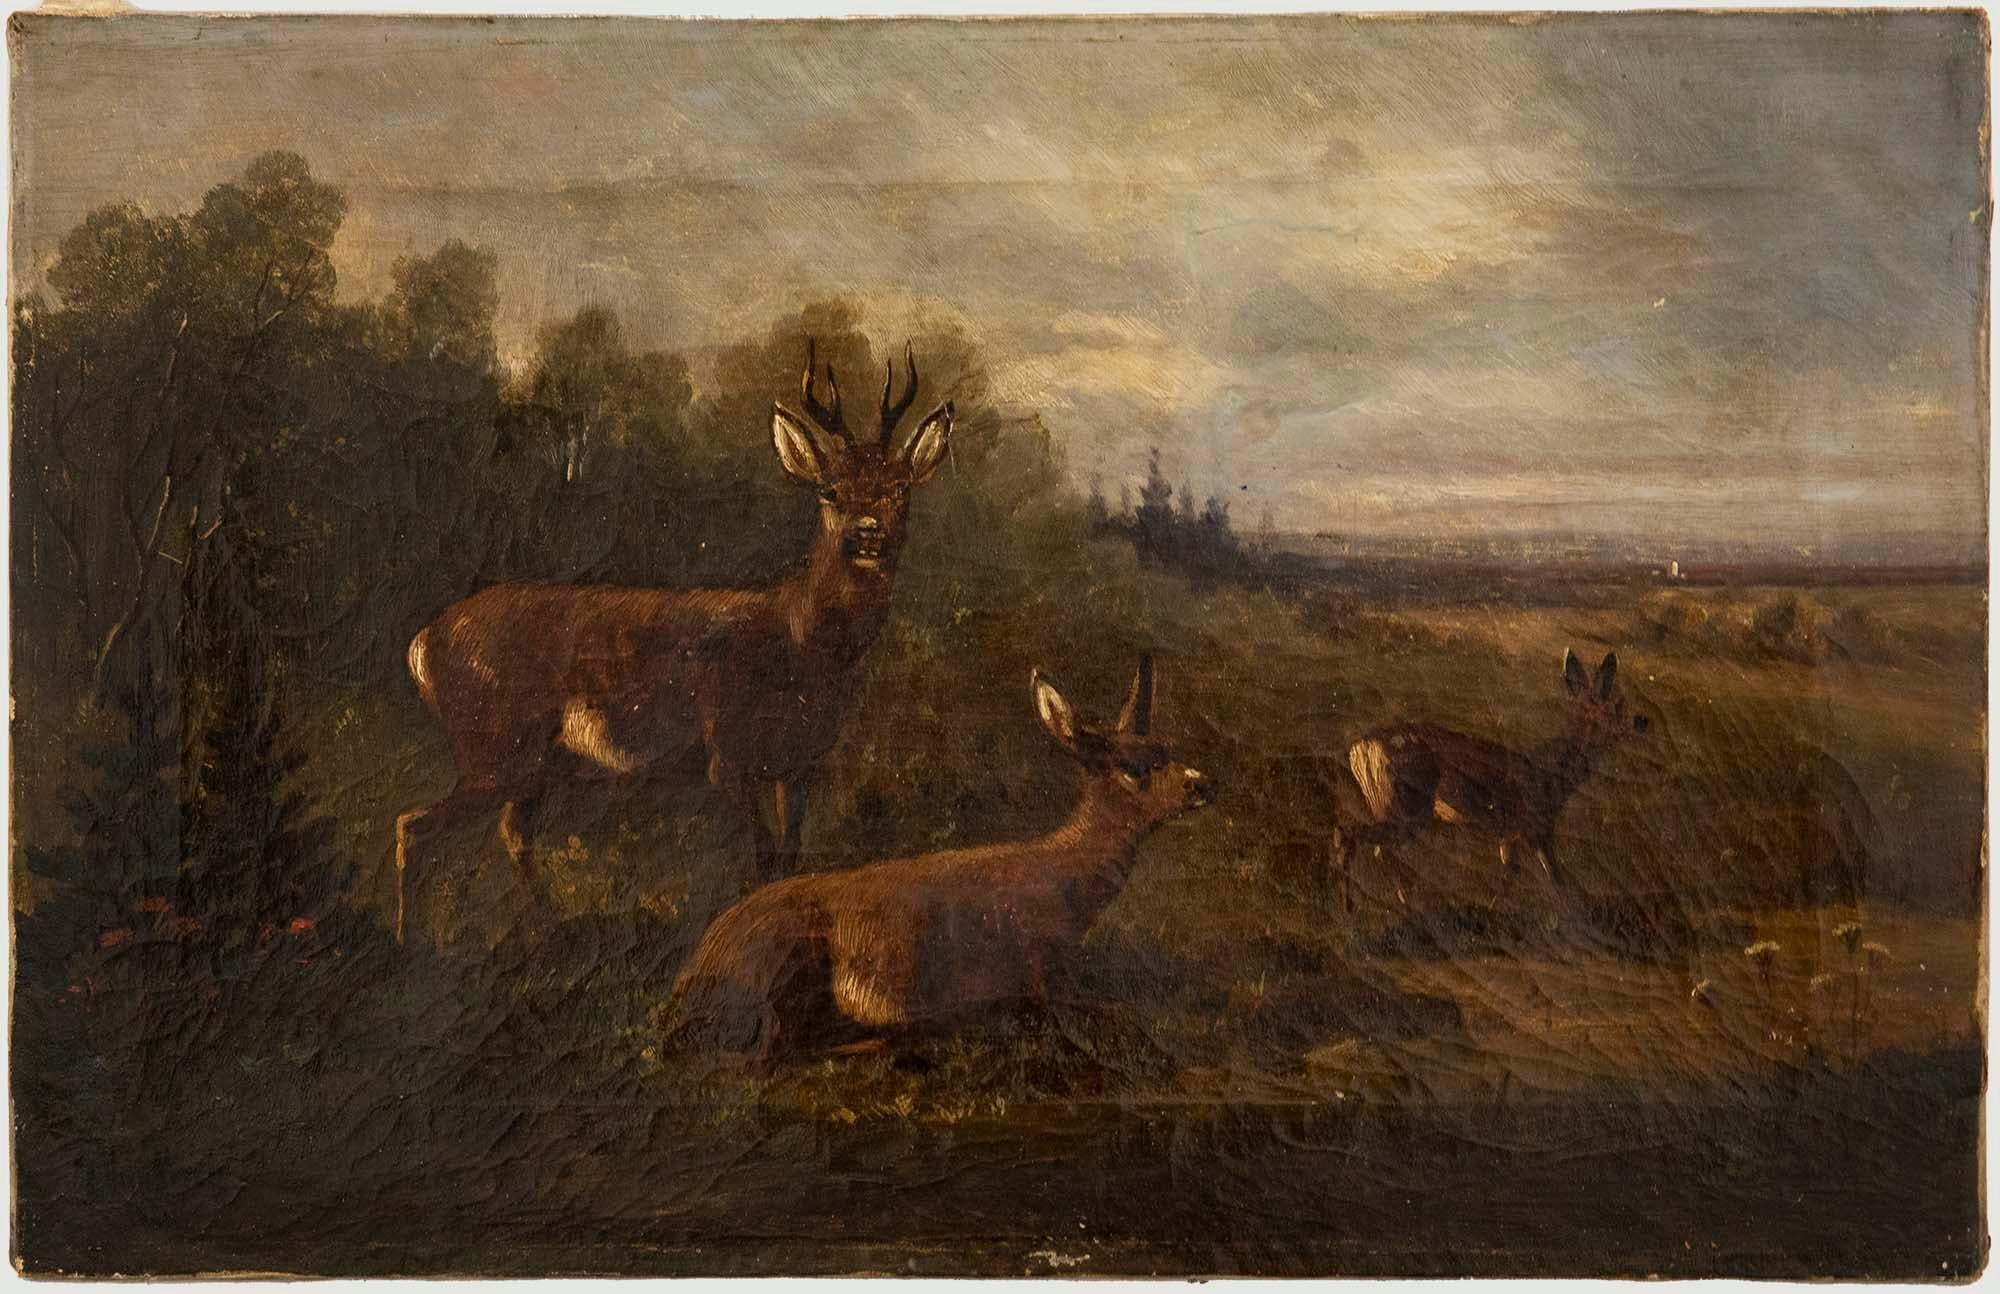 A charming 19th Century highland scene in a traditional and delicate style, showing a family of deer on the edge of a forest. The doe rests in the grass as the fawn scampers off into the pasture. The buck stares alertly towards the viewer. The